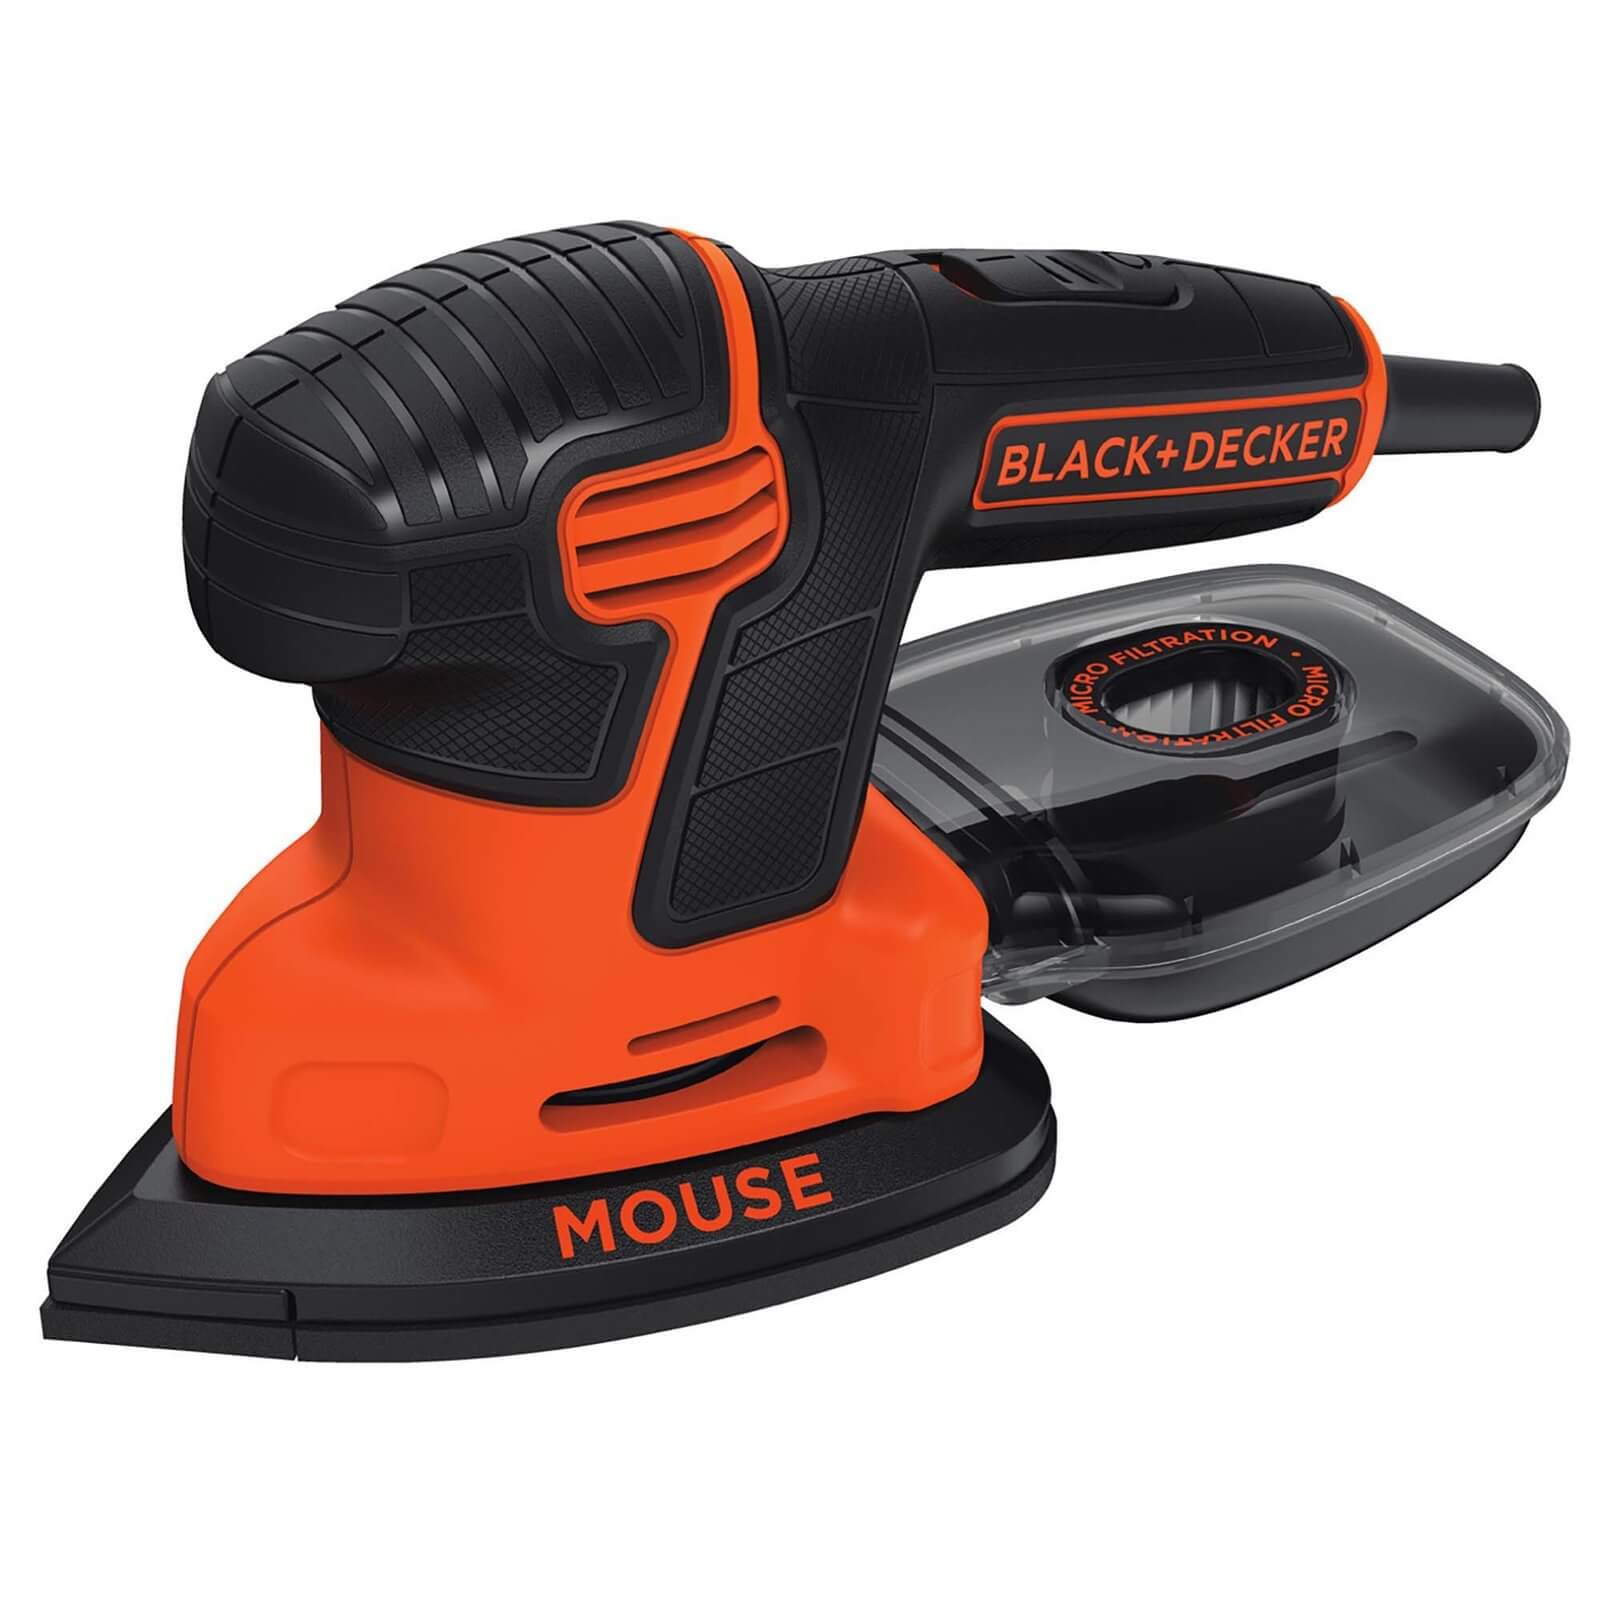 BLACK+DECKER 120W Corded Detail Mouse Sander with 6x Accessories and Storage Bag (KA2000-GB)